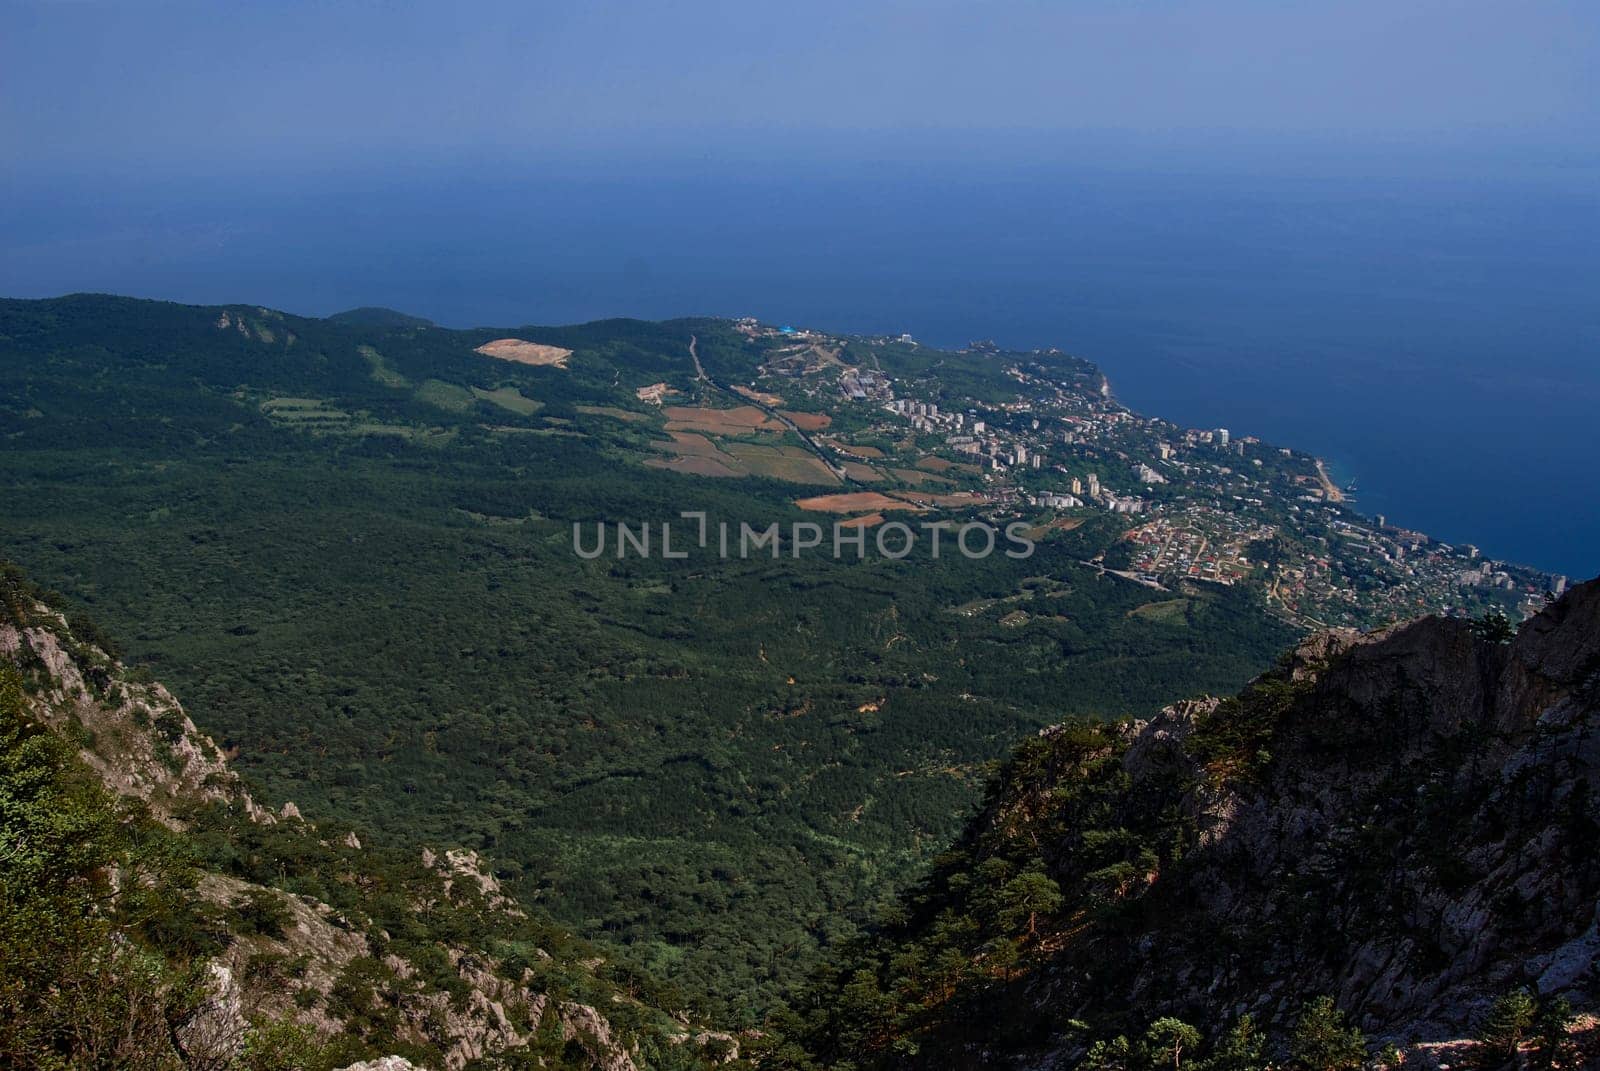 View from the mountain, below is a valley flowing into the Black Sea.The blue colour of the sea from above is beautiful.